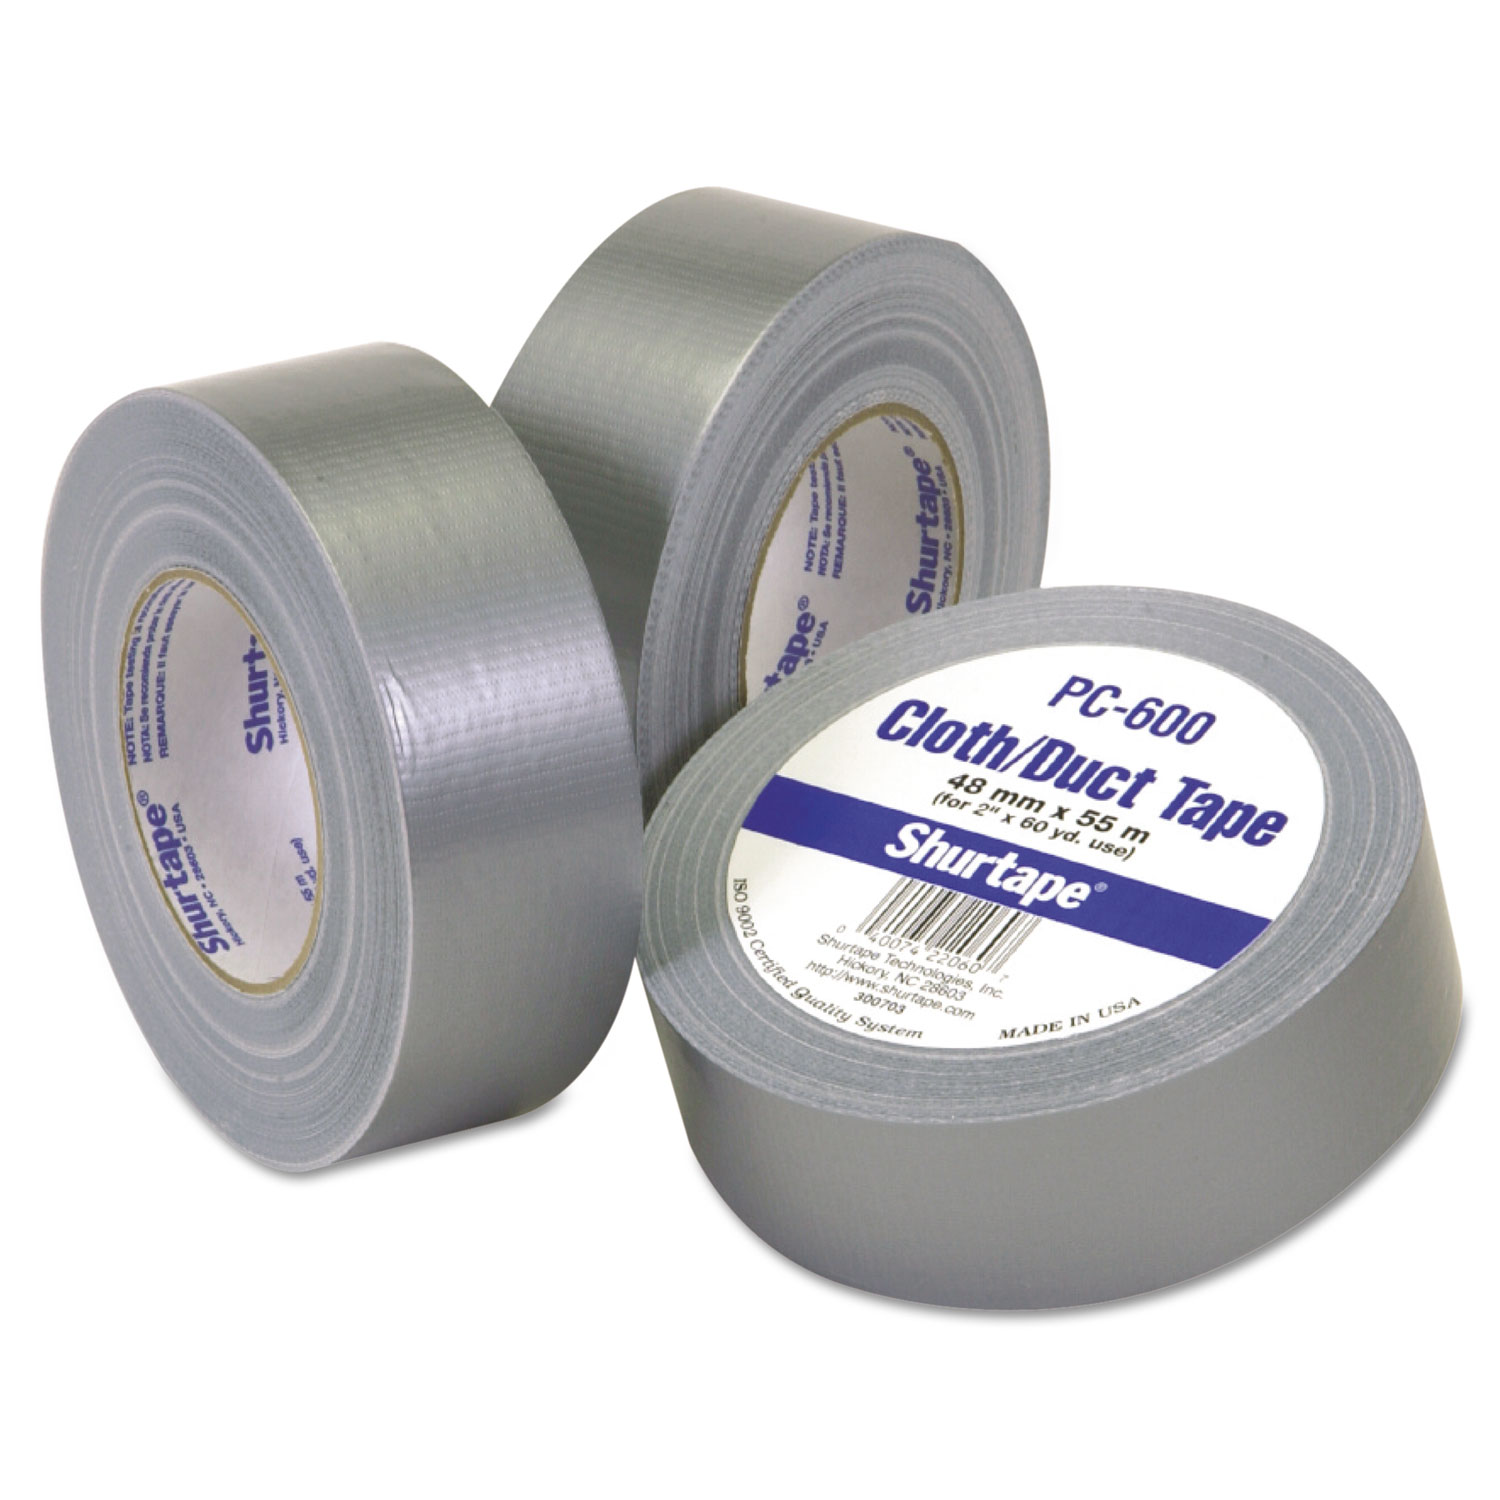 General Purpose Duct Tape, 2 x 60yd, Silver